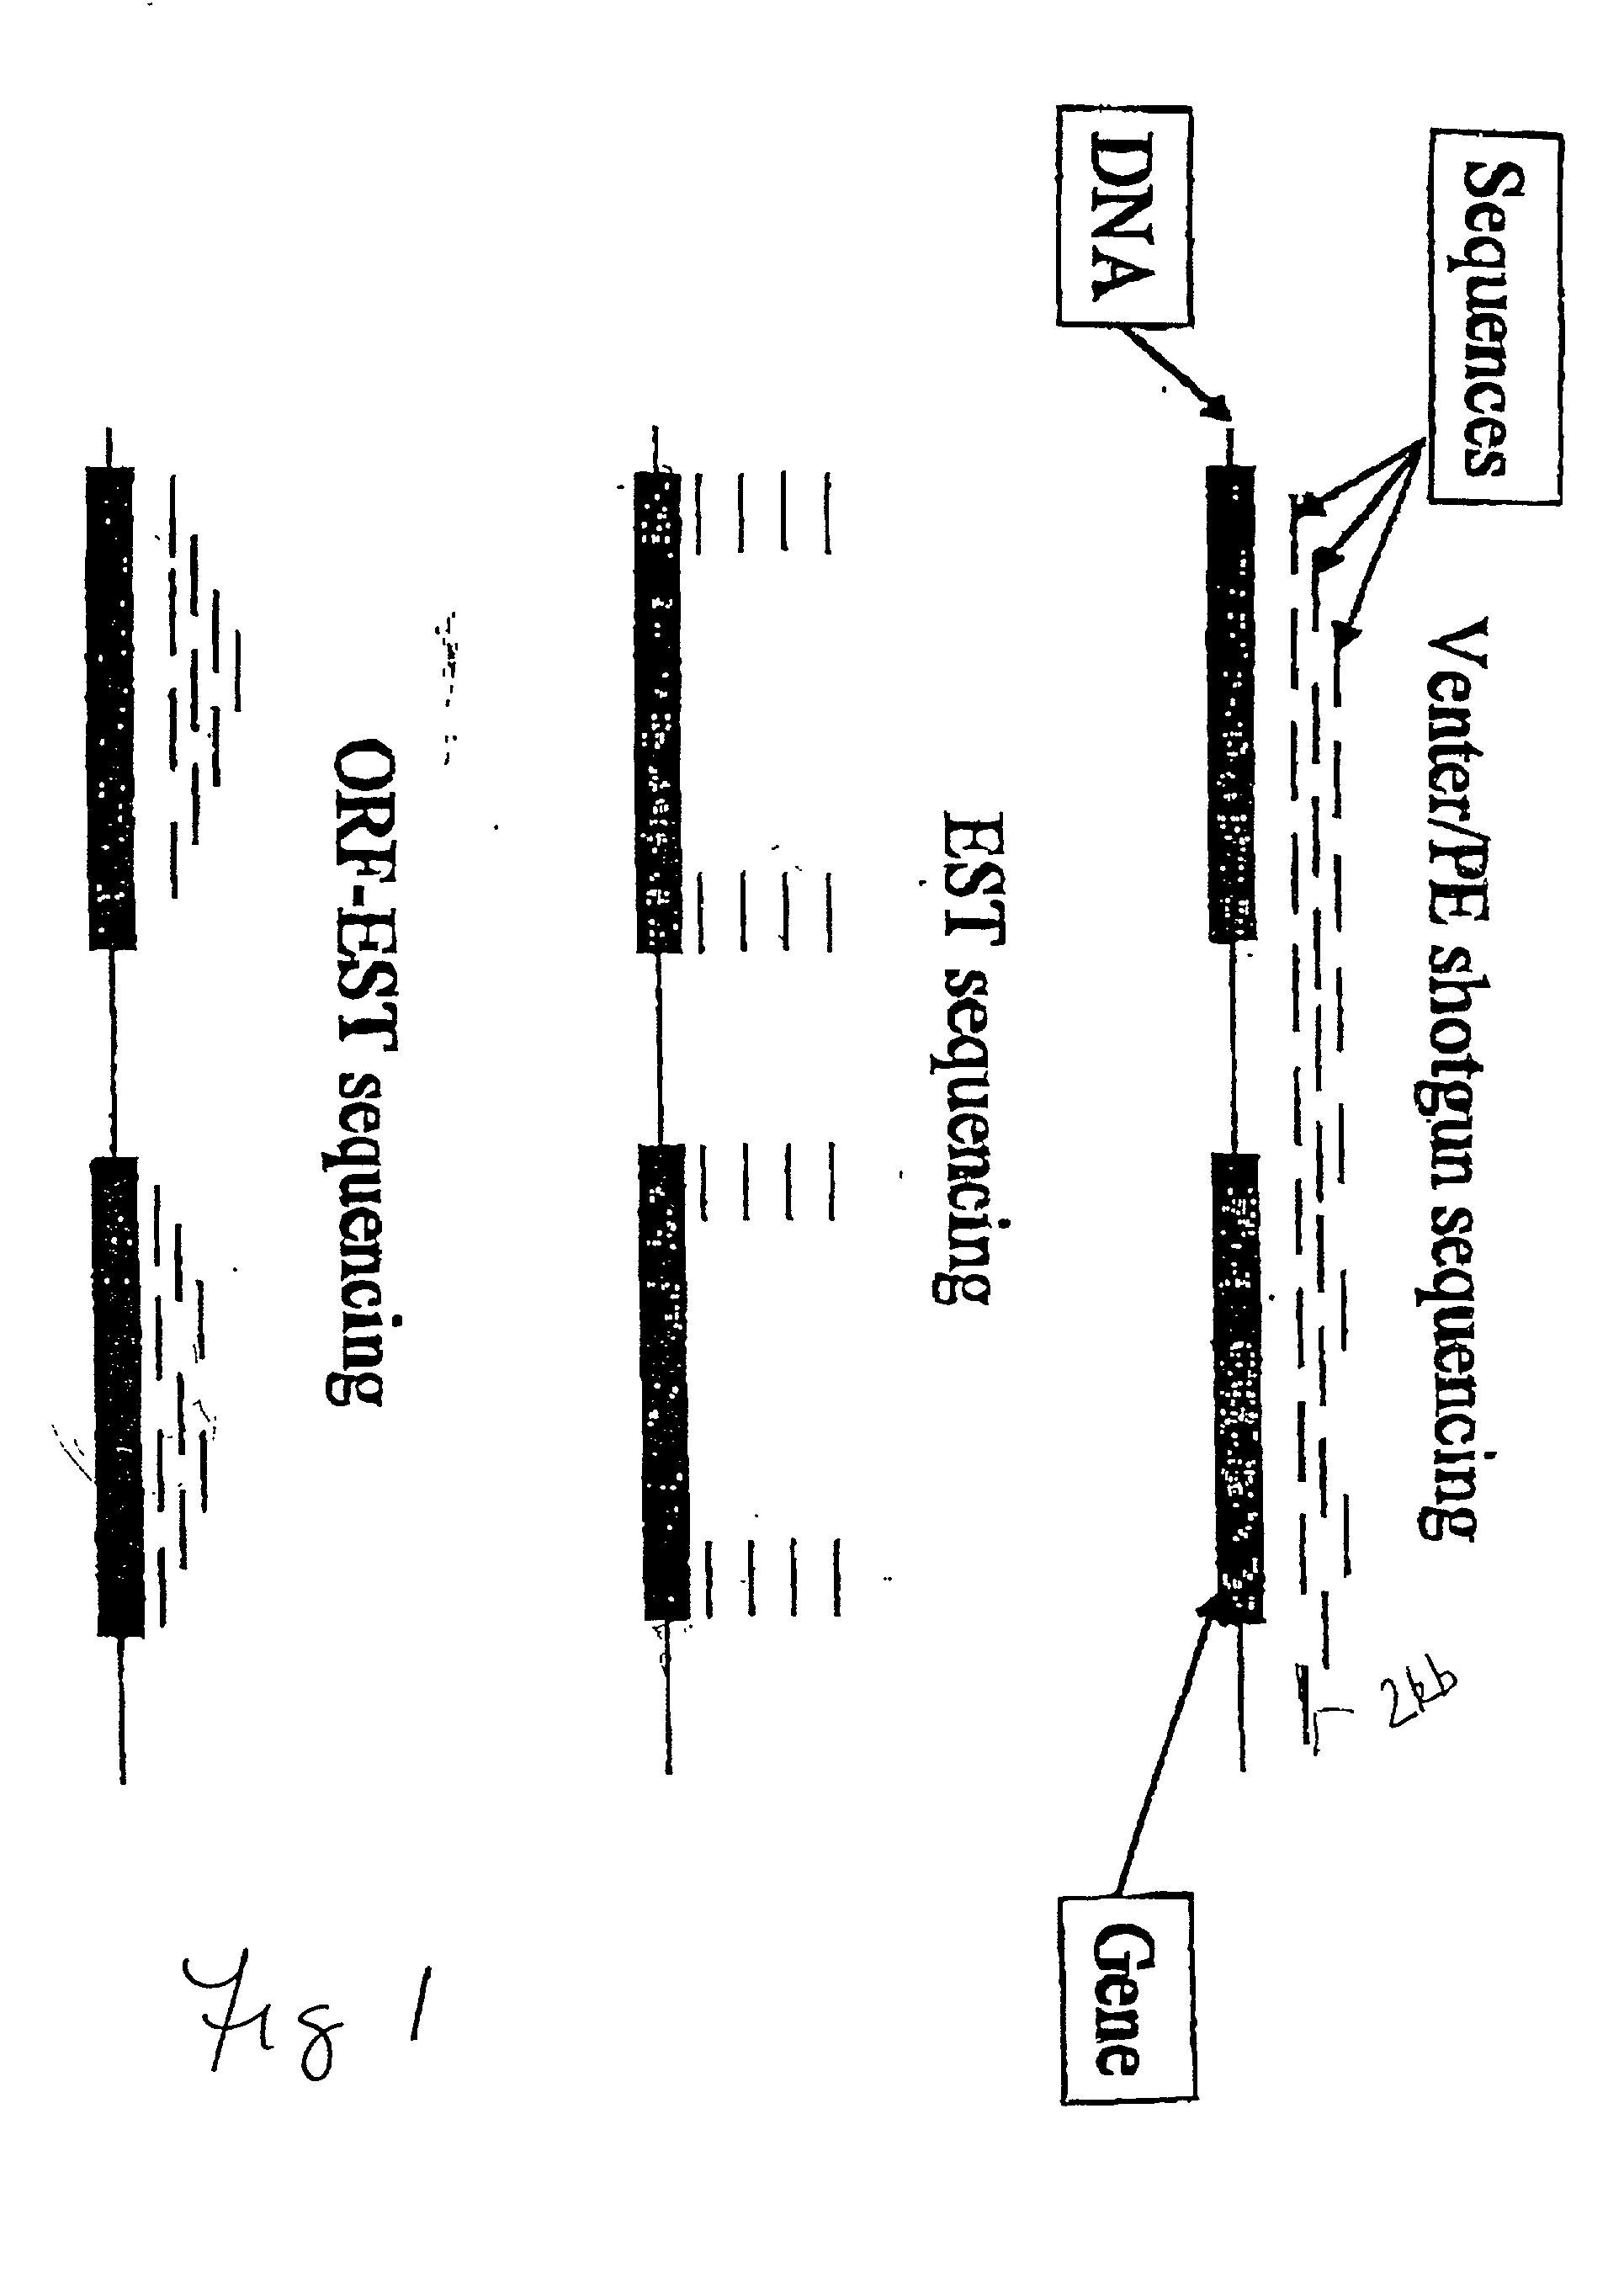 Method for determining nucleotide sequences using arbitrary primers and low stringency